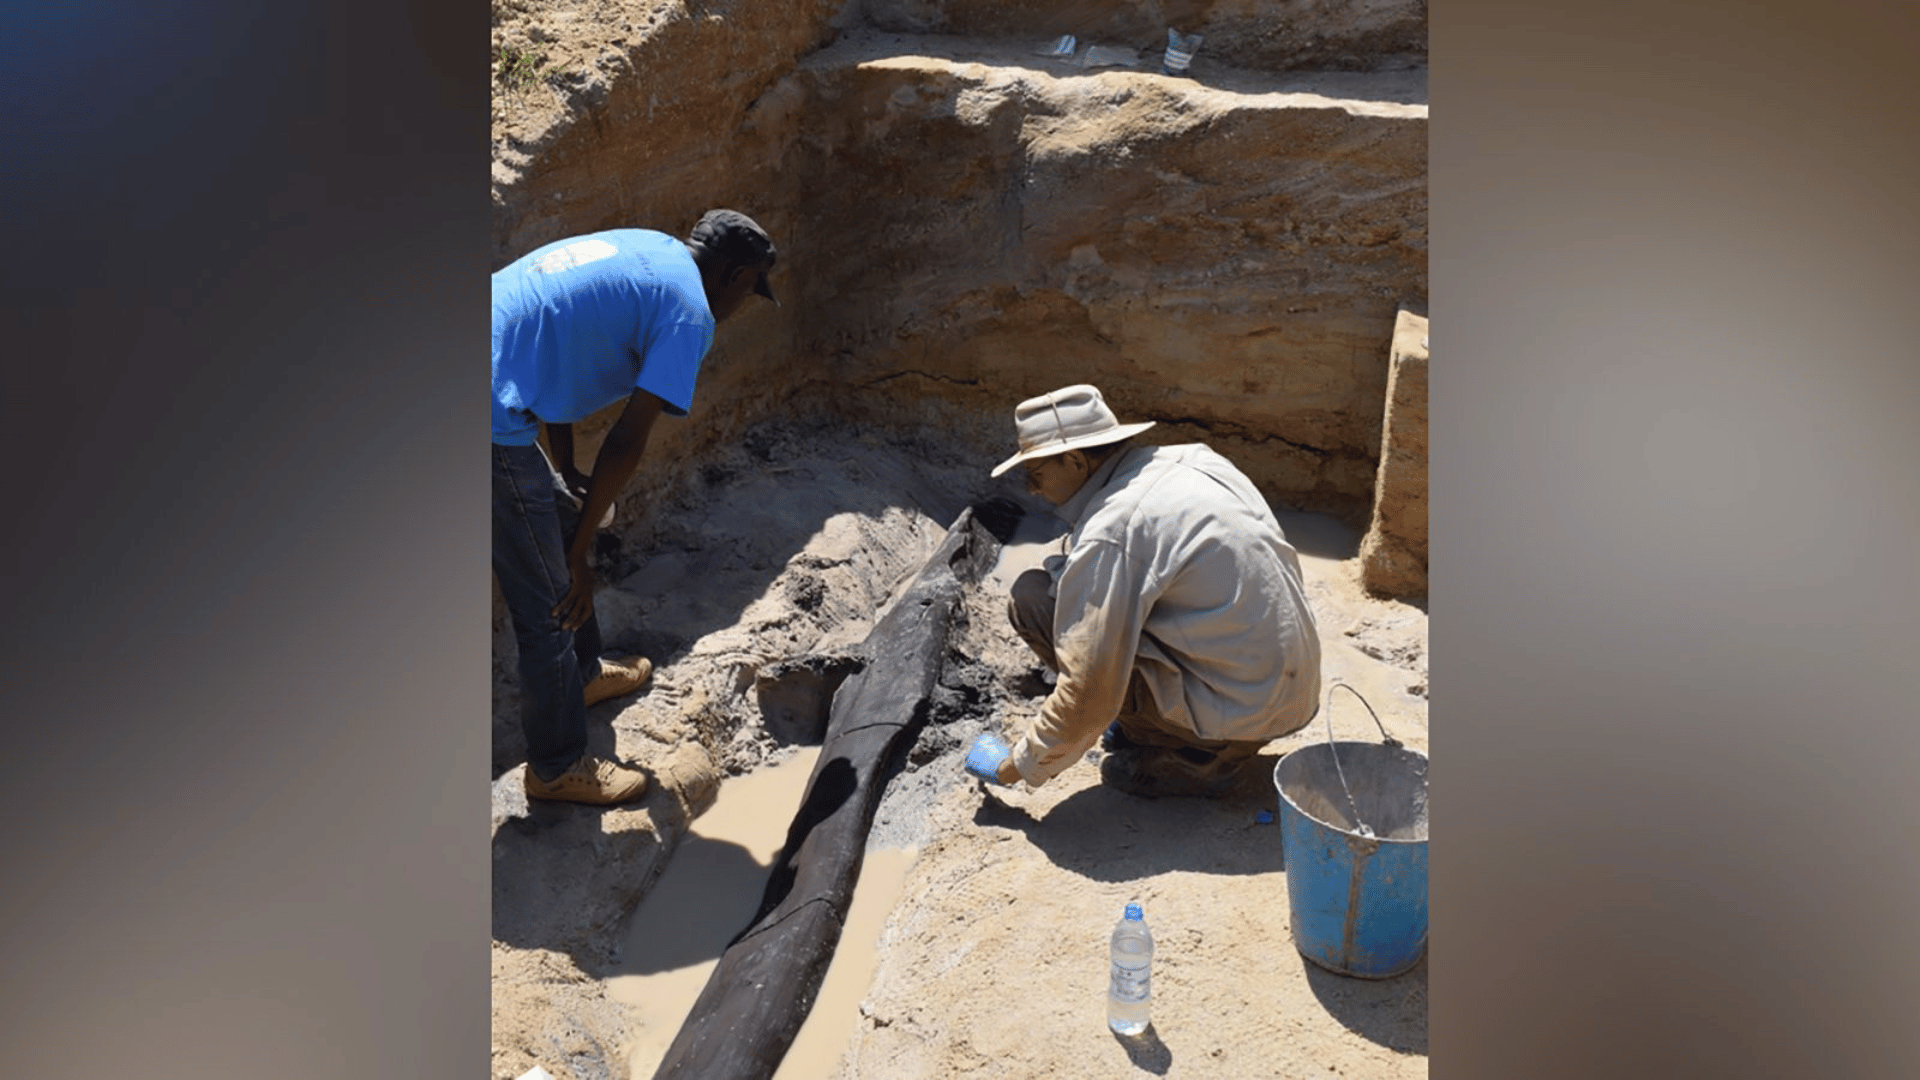 During the 2019 archaeological dig near the Kalombo River in Zambia, which led to the discovery of the 476,000-year-old wooden structure. LARRY BARHAM:UNIVERSITY OF LIVERPOOL